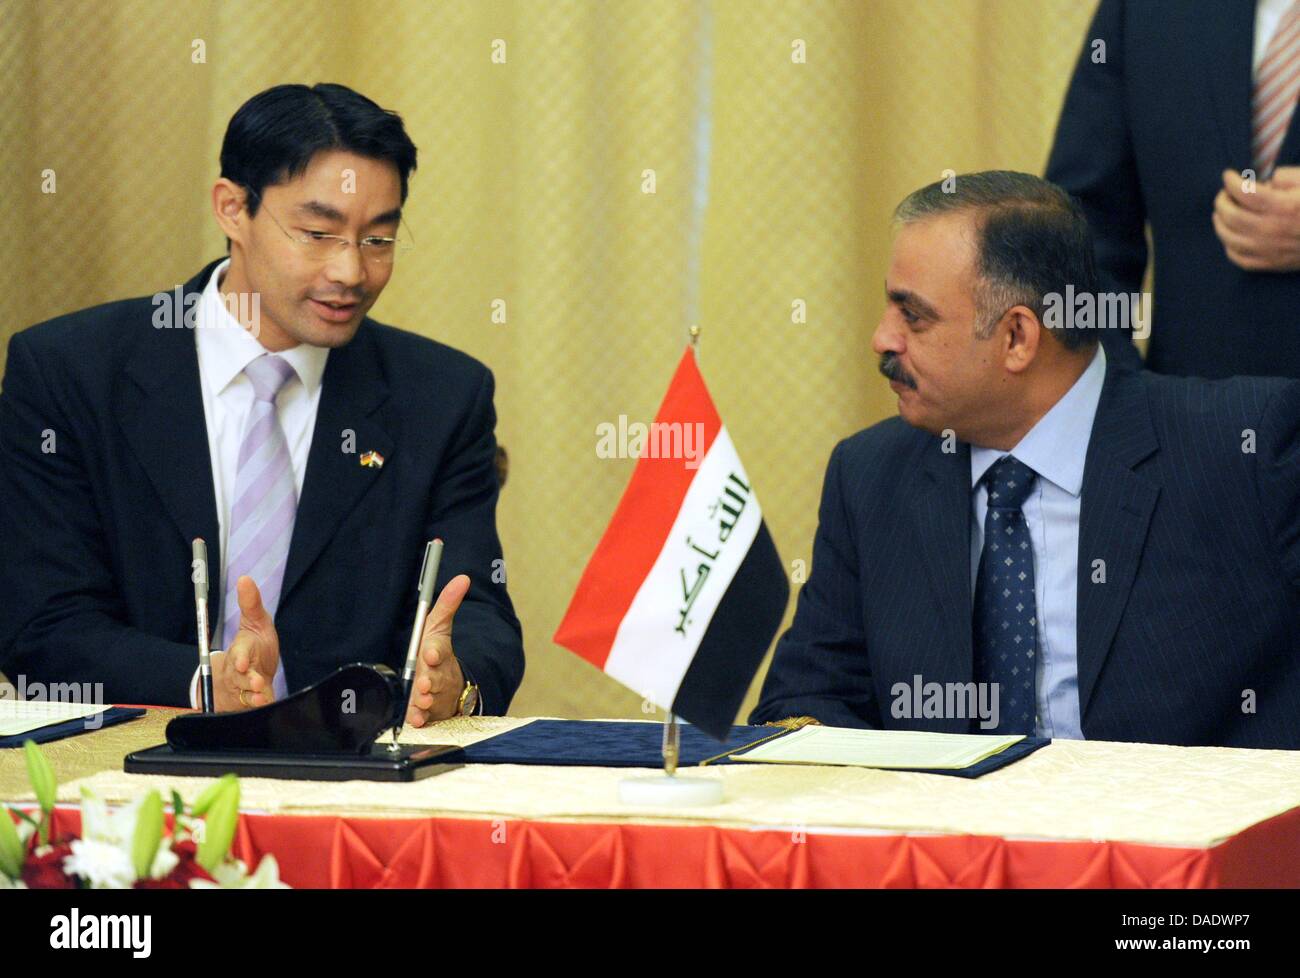 German Minister of Economics and Technology Philipp Roesler (L) and Iraqi Minister of Industry and Minerals Ahmed Al Karbuli sign a protocol to broaden economic cooperation between the two countries in Baghdad, Iraq, 03 November 2011. The goal of Roesler's two-day trip to the war torn country is the further expansion of economic relations. Photo: RAINER JENSEN Stock Photo